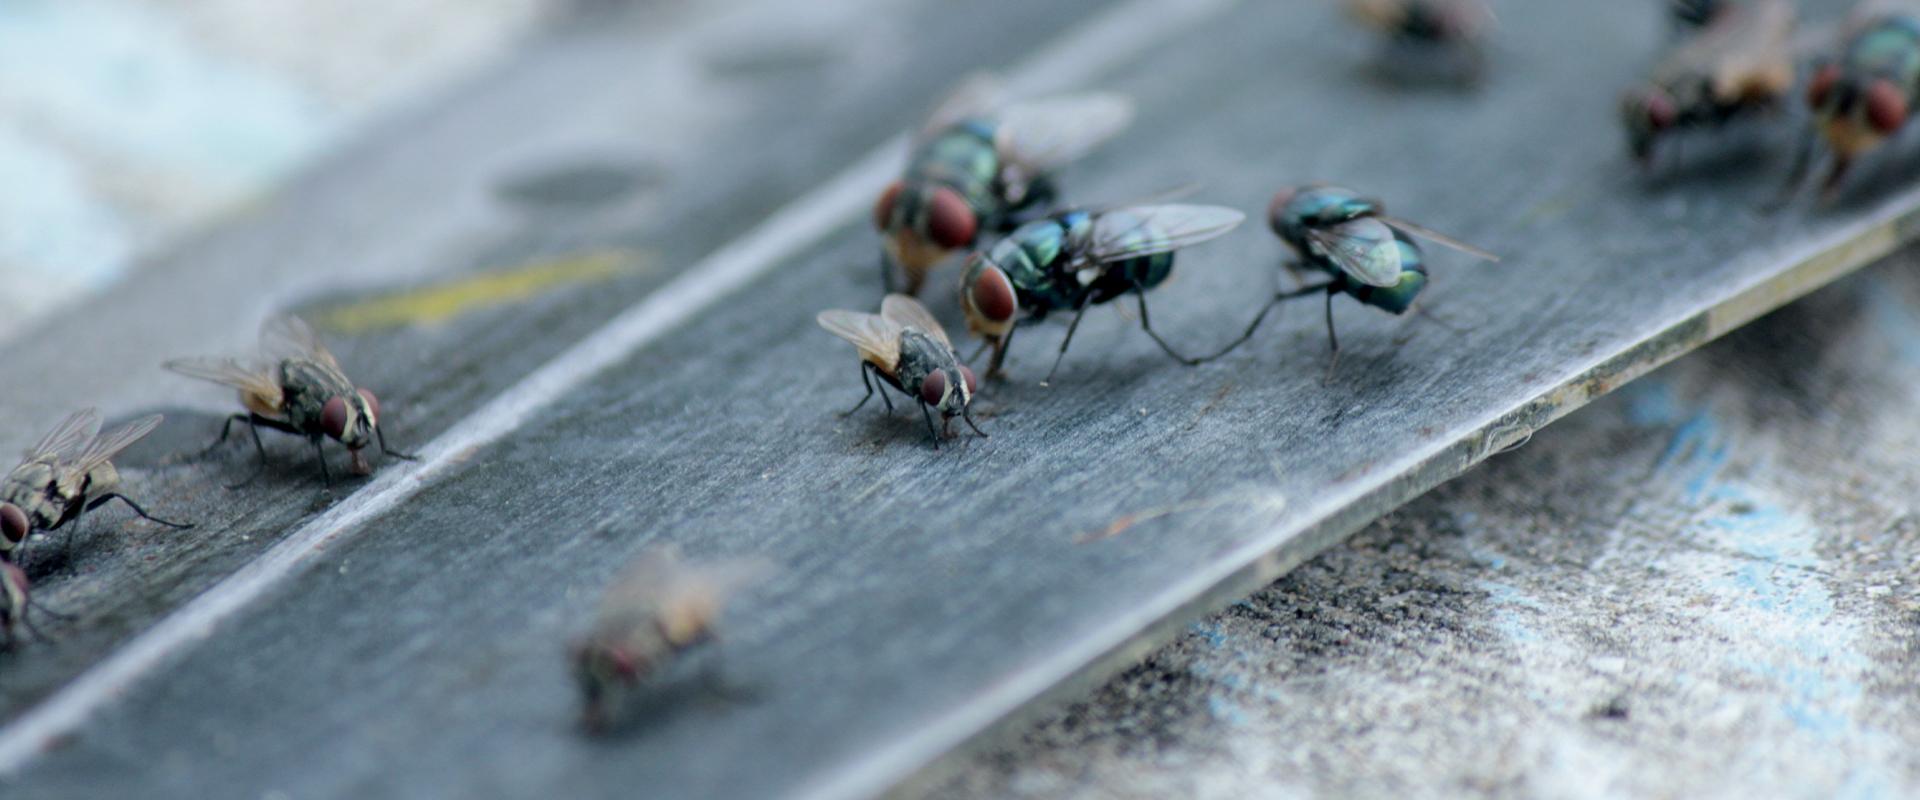 group of house flies outside